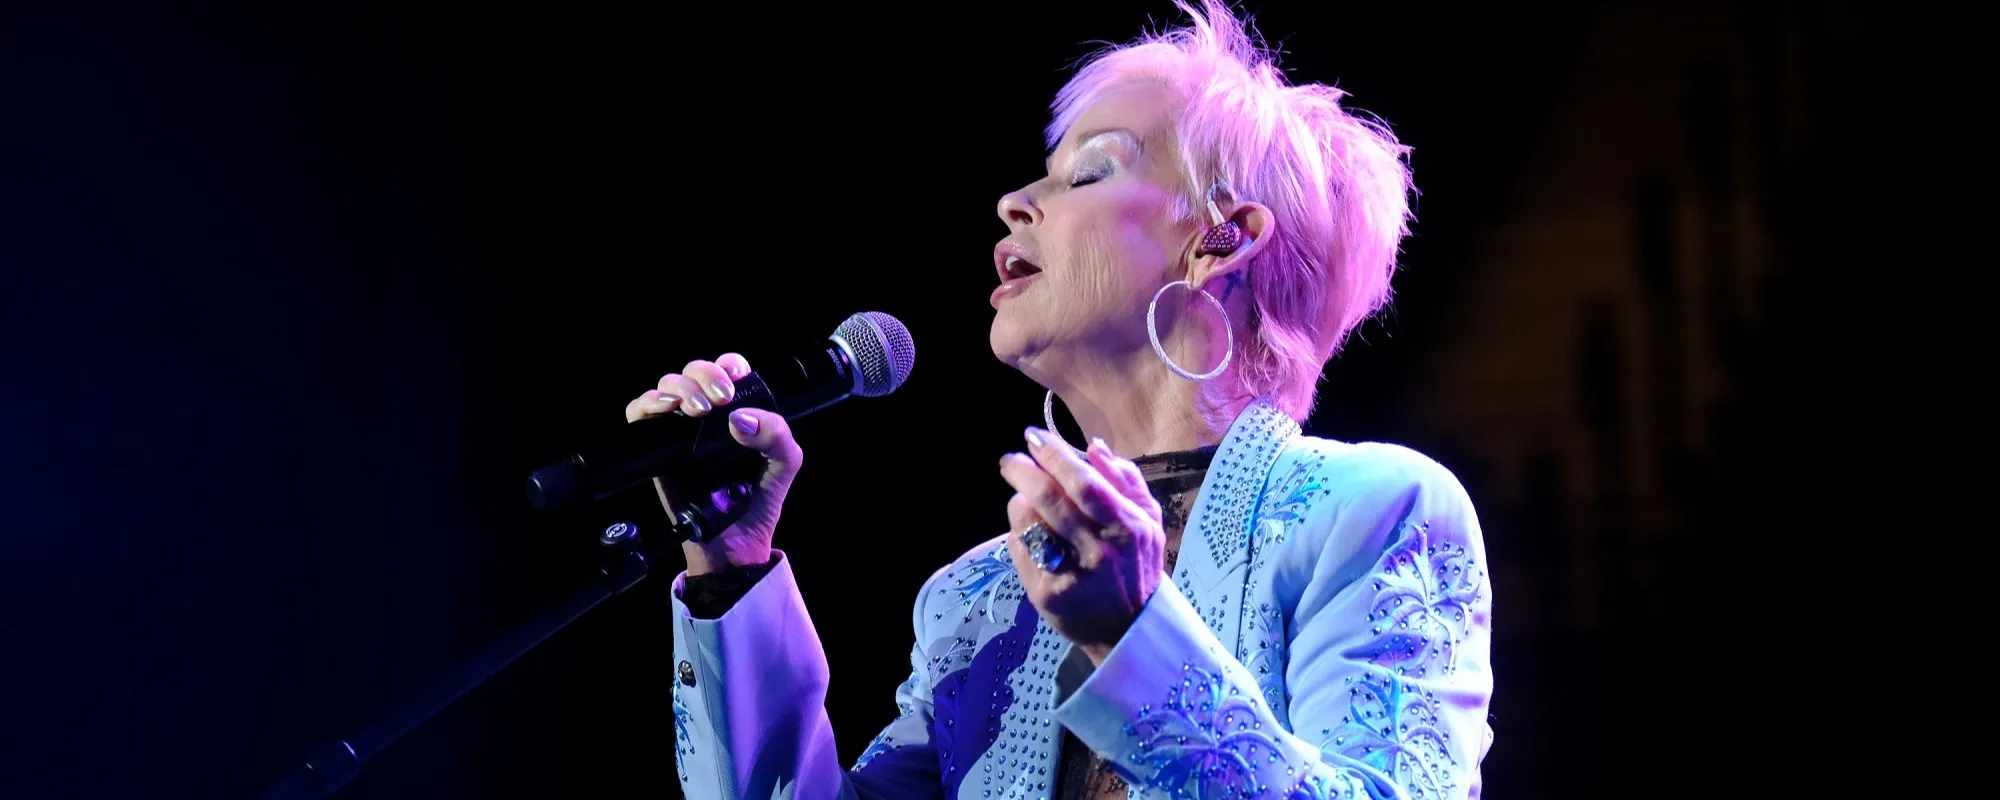 Watch Lorrie Morgan Pay Tribute to Late Husband Keith Whitley with Moving “Don’t Close Your Eyes” Performance